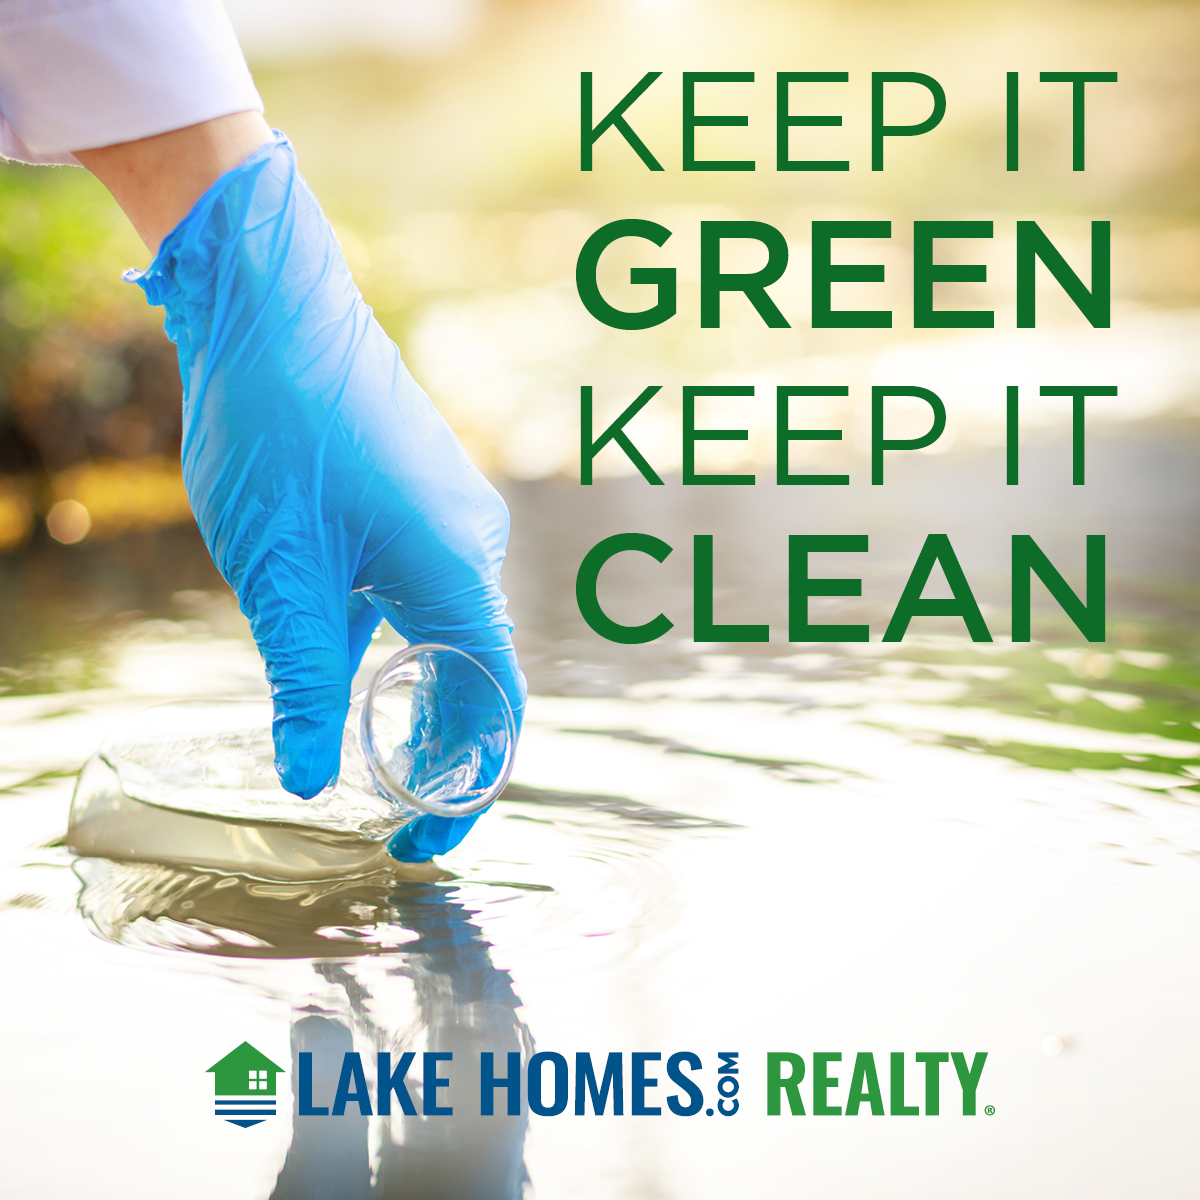 Happy Earth Day! Today reminds us to all do our part in keeping the Earth and our lakes clean🌎♻️

#lakearrowhead #lakearrowheadga #georgialakes #lakelife #lakeliving #waterfrontliving #lakerealestate #waleskaga #earthday #happyearthday #keepitgreen #keepitclean #gogreen